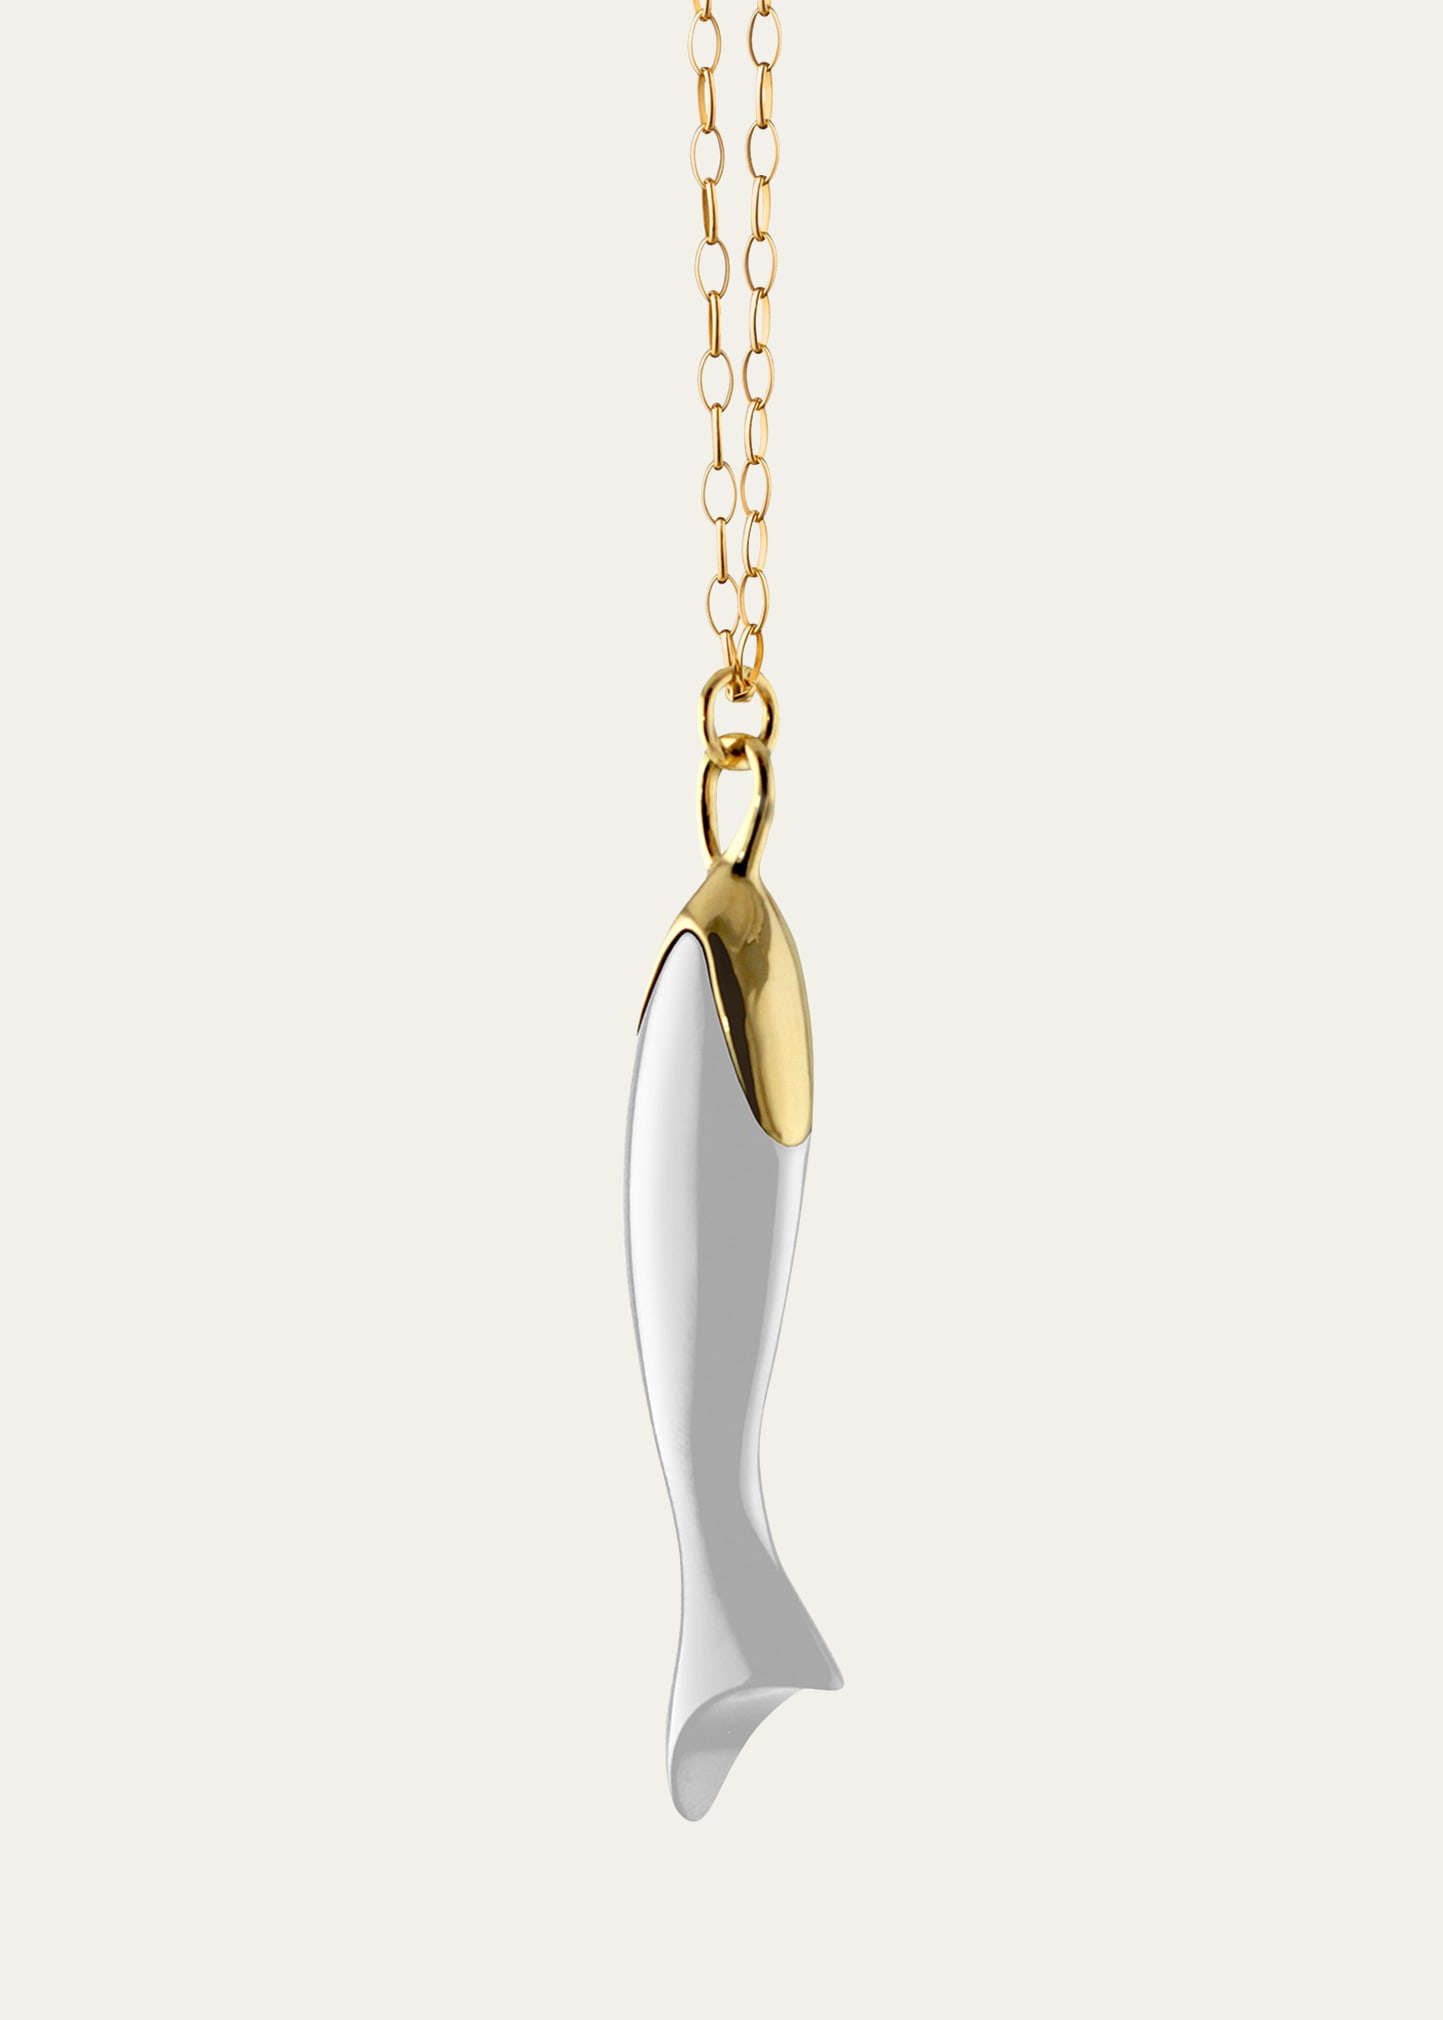 Perseverance Fish Charm Necklace in 18K Gold & White Ceramic